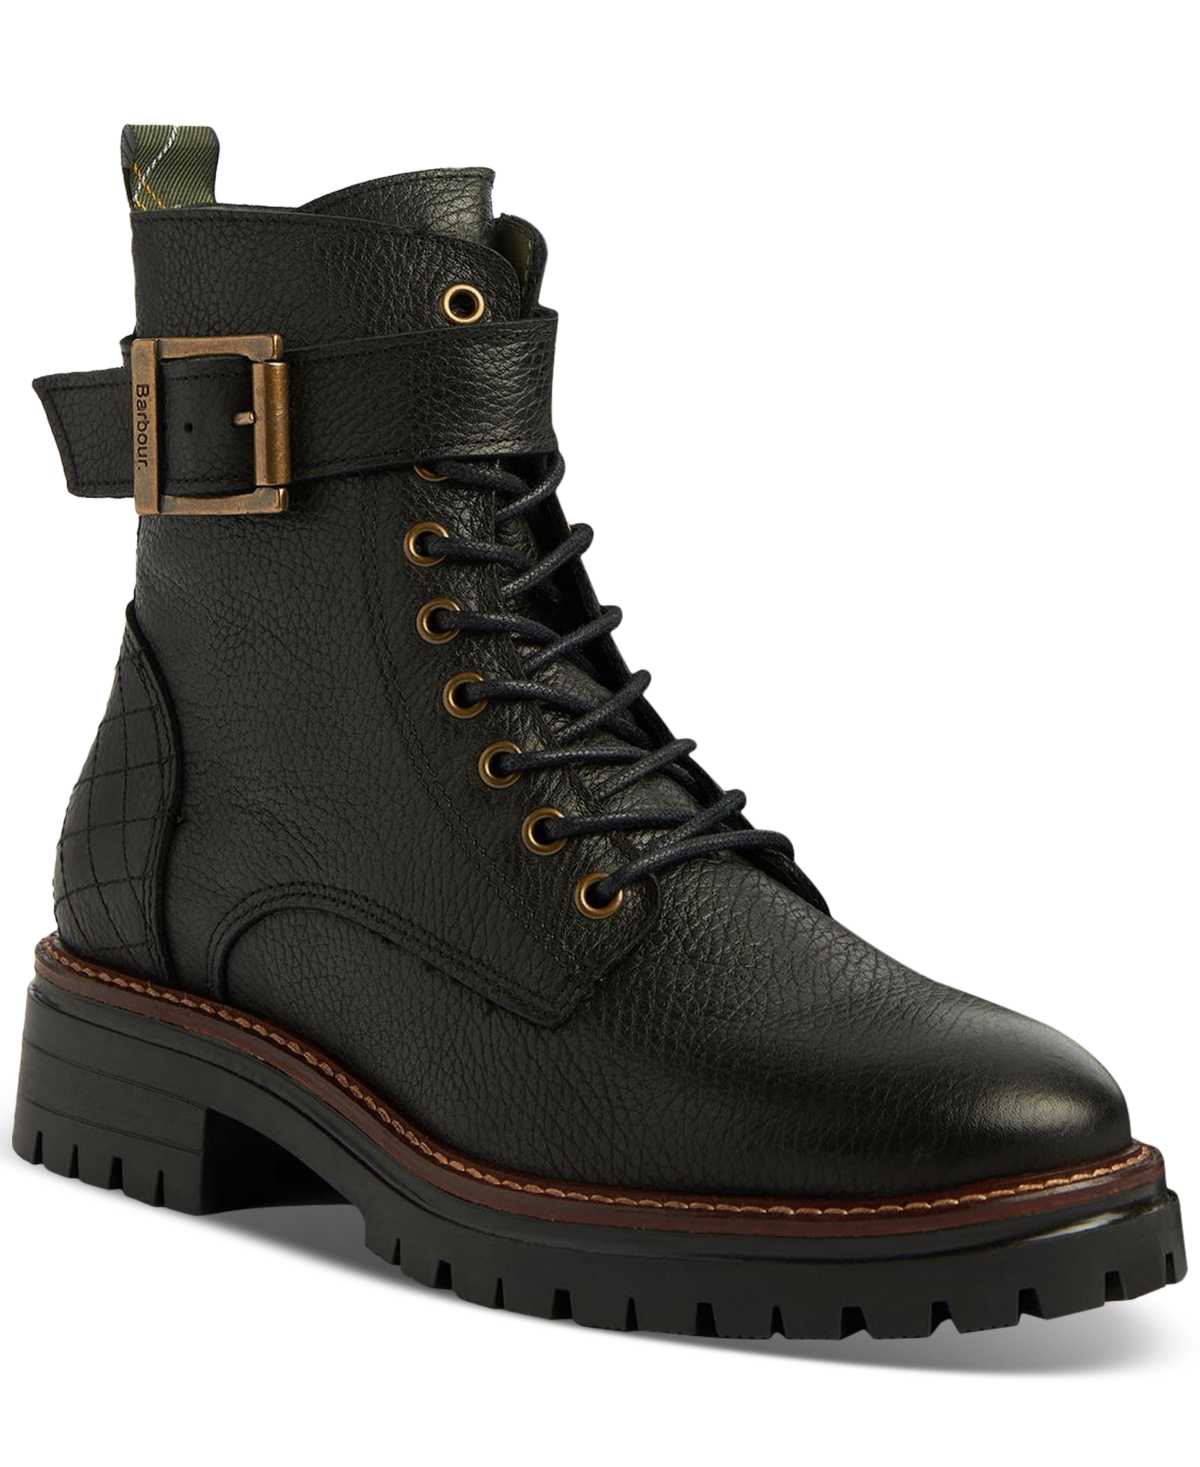 BARBOUR WOMEN'S HEIDI LACE-UP BUCKLED COMBAT BOOTS